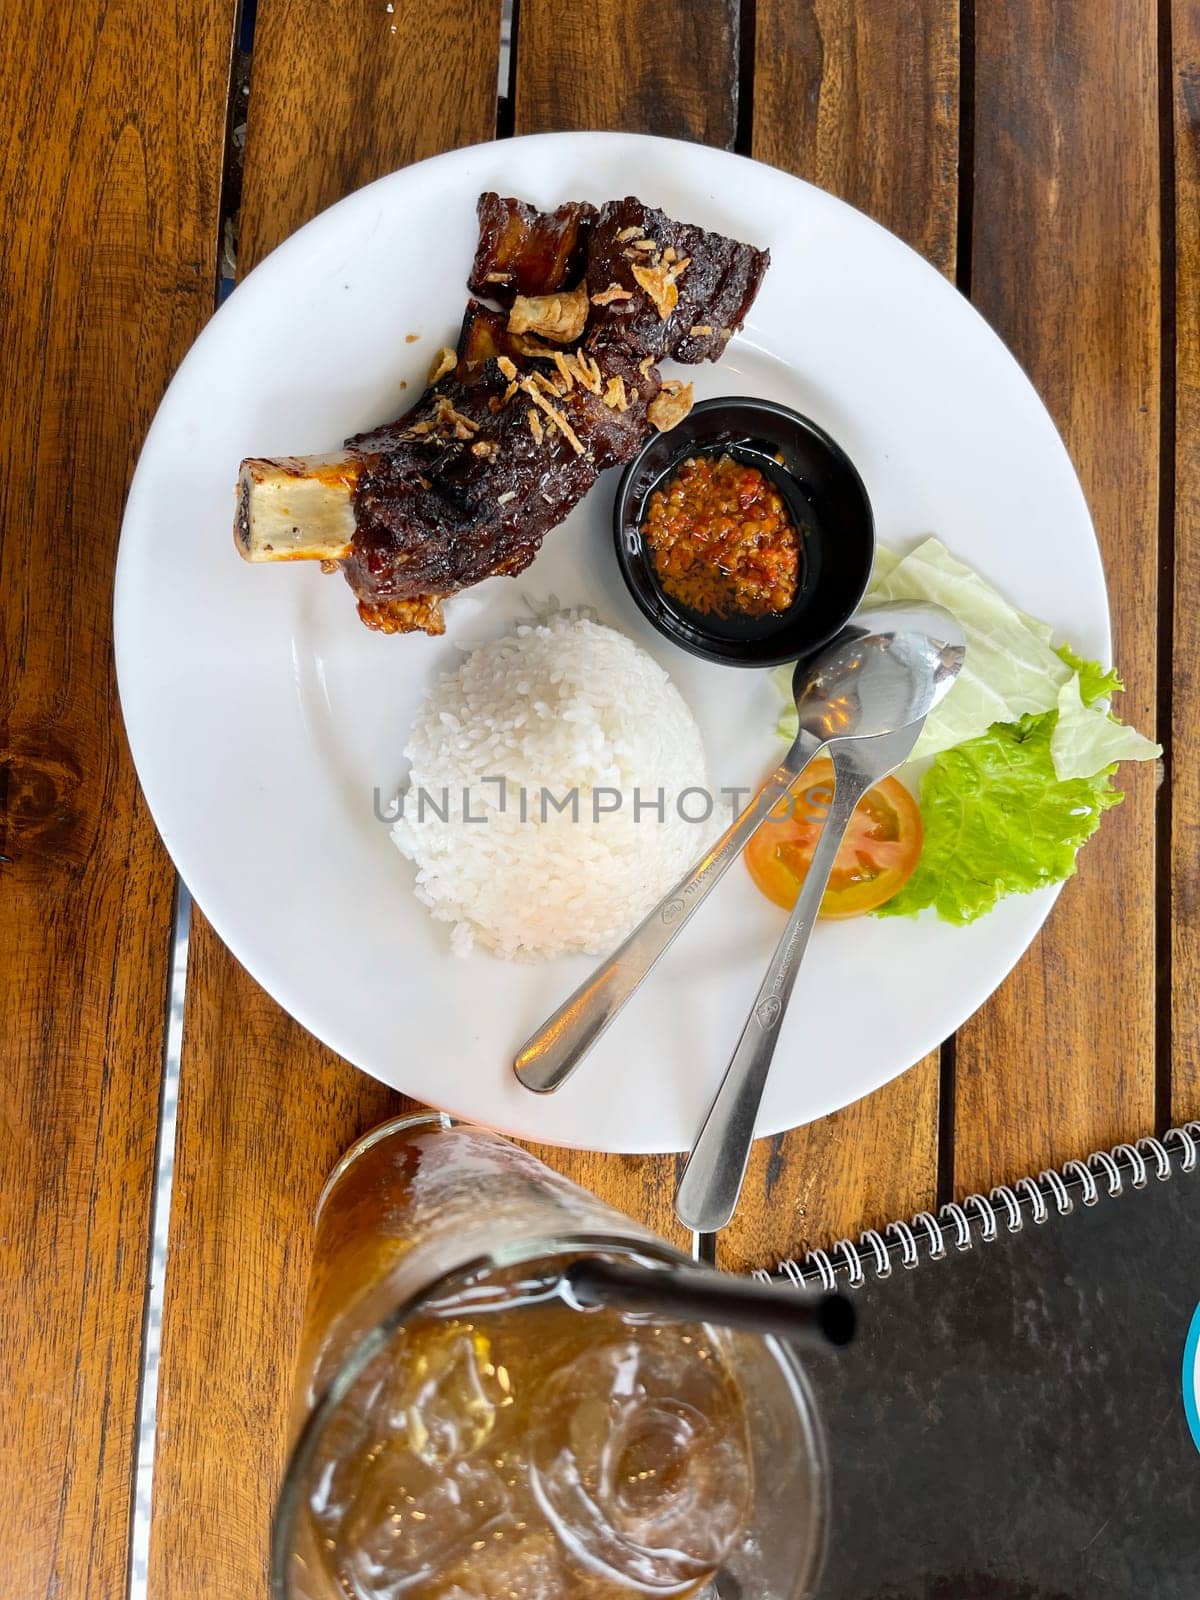 Spicy hot honey roasted grilled spare ribs from summer BBQ served with hot chili paste by antoksena